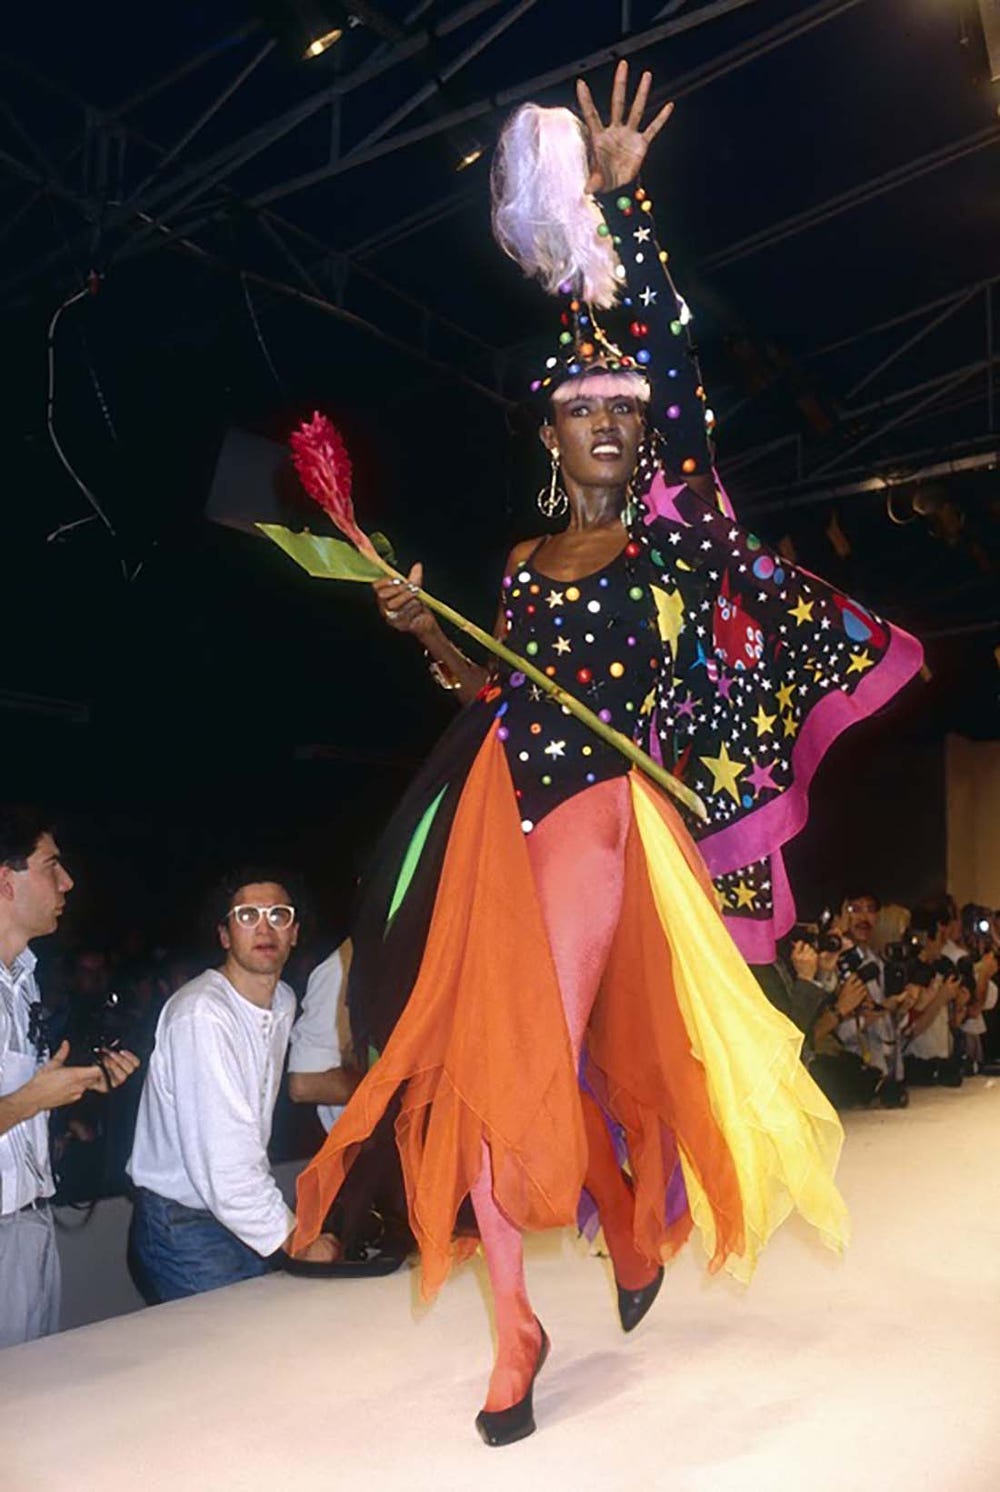 Model with her arm in the air on a runway wearing a bright costume